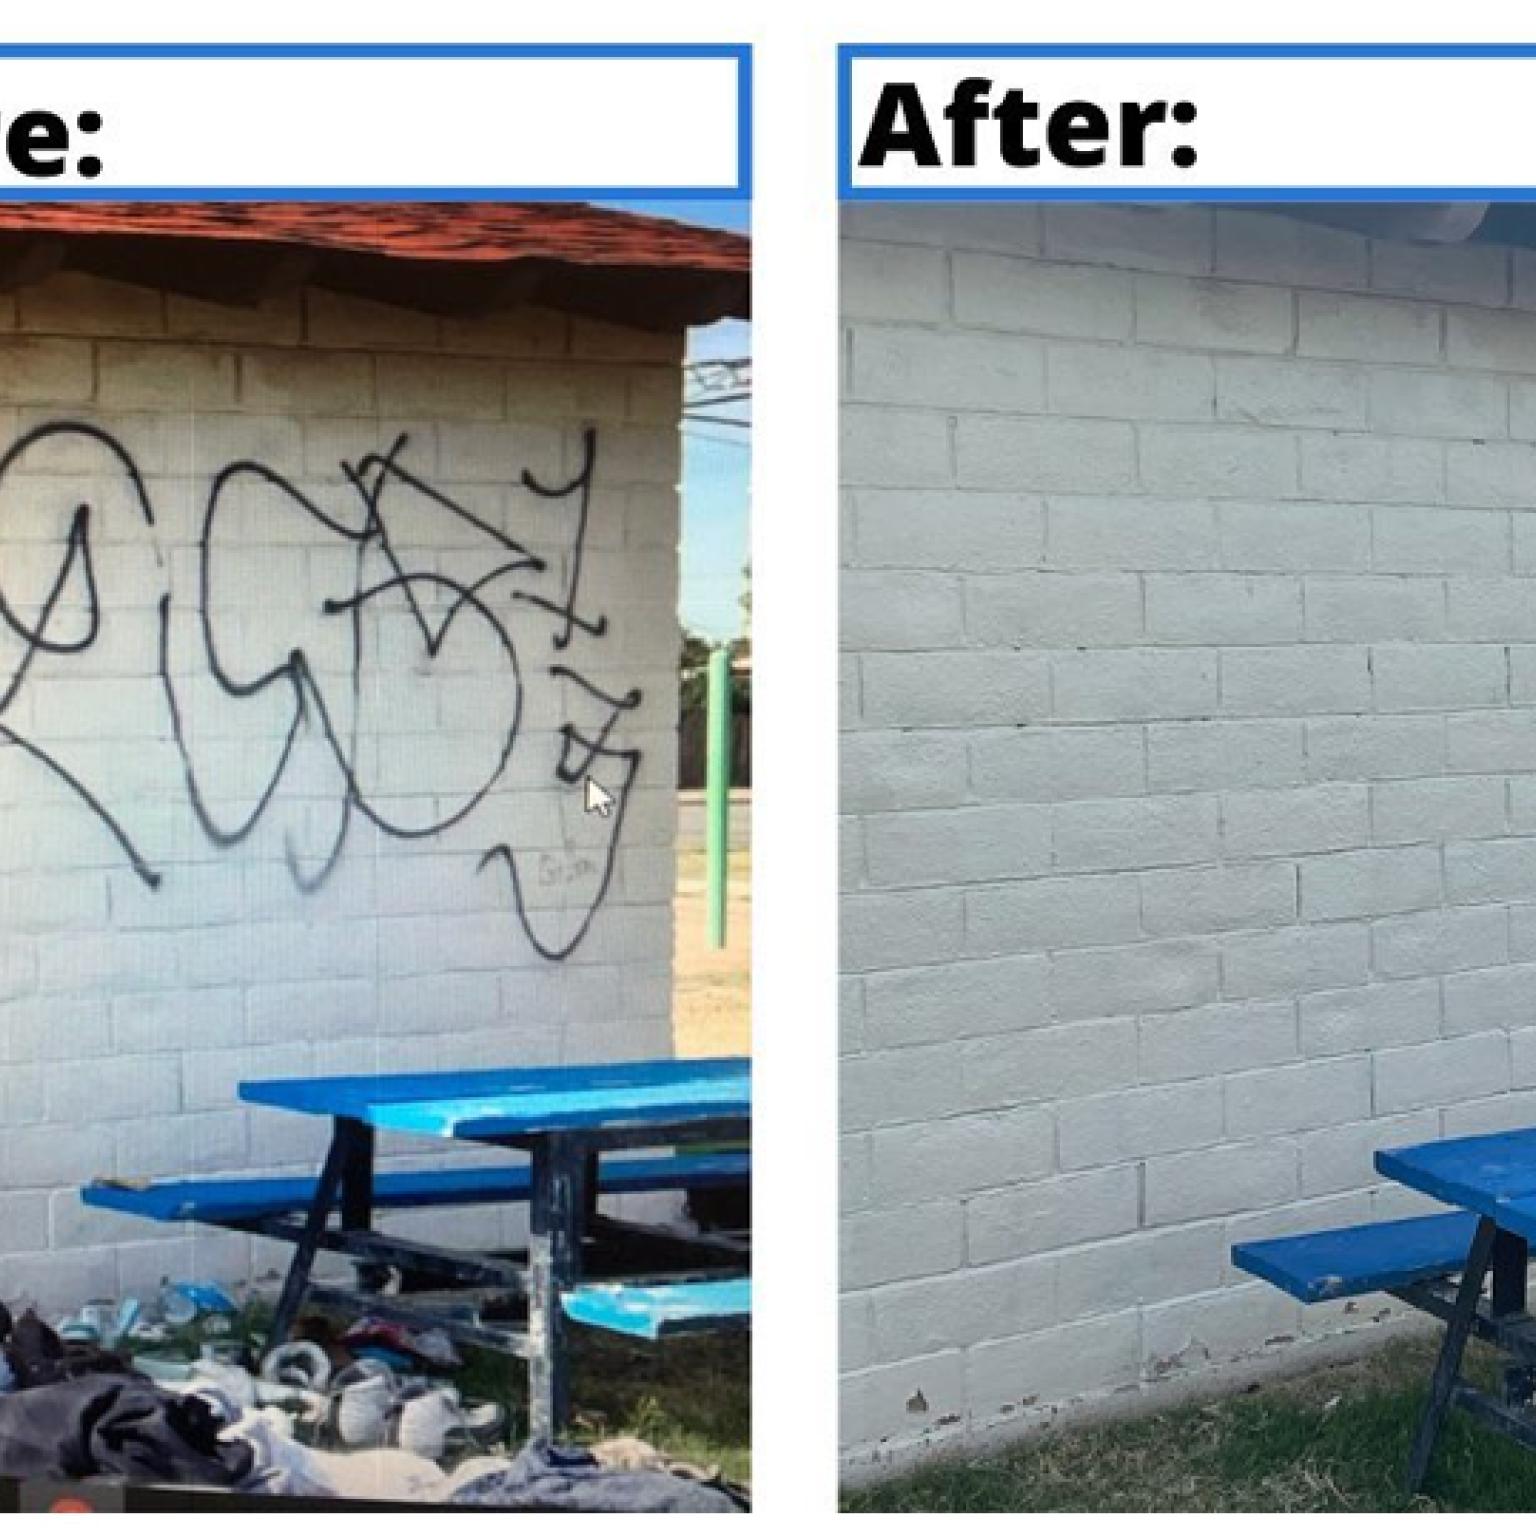 Before and after pictures of graffiti wall clean and painted.